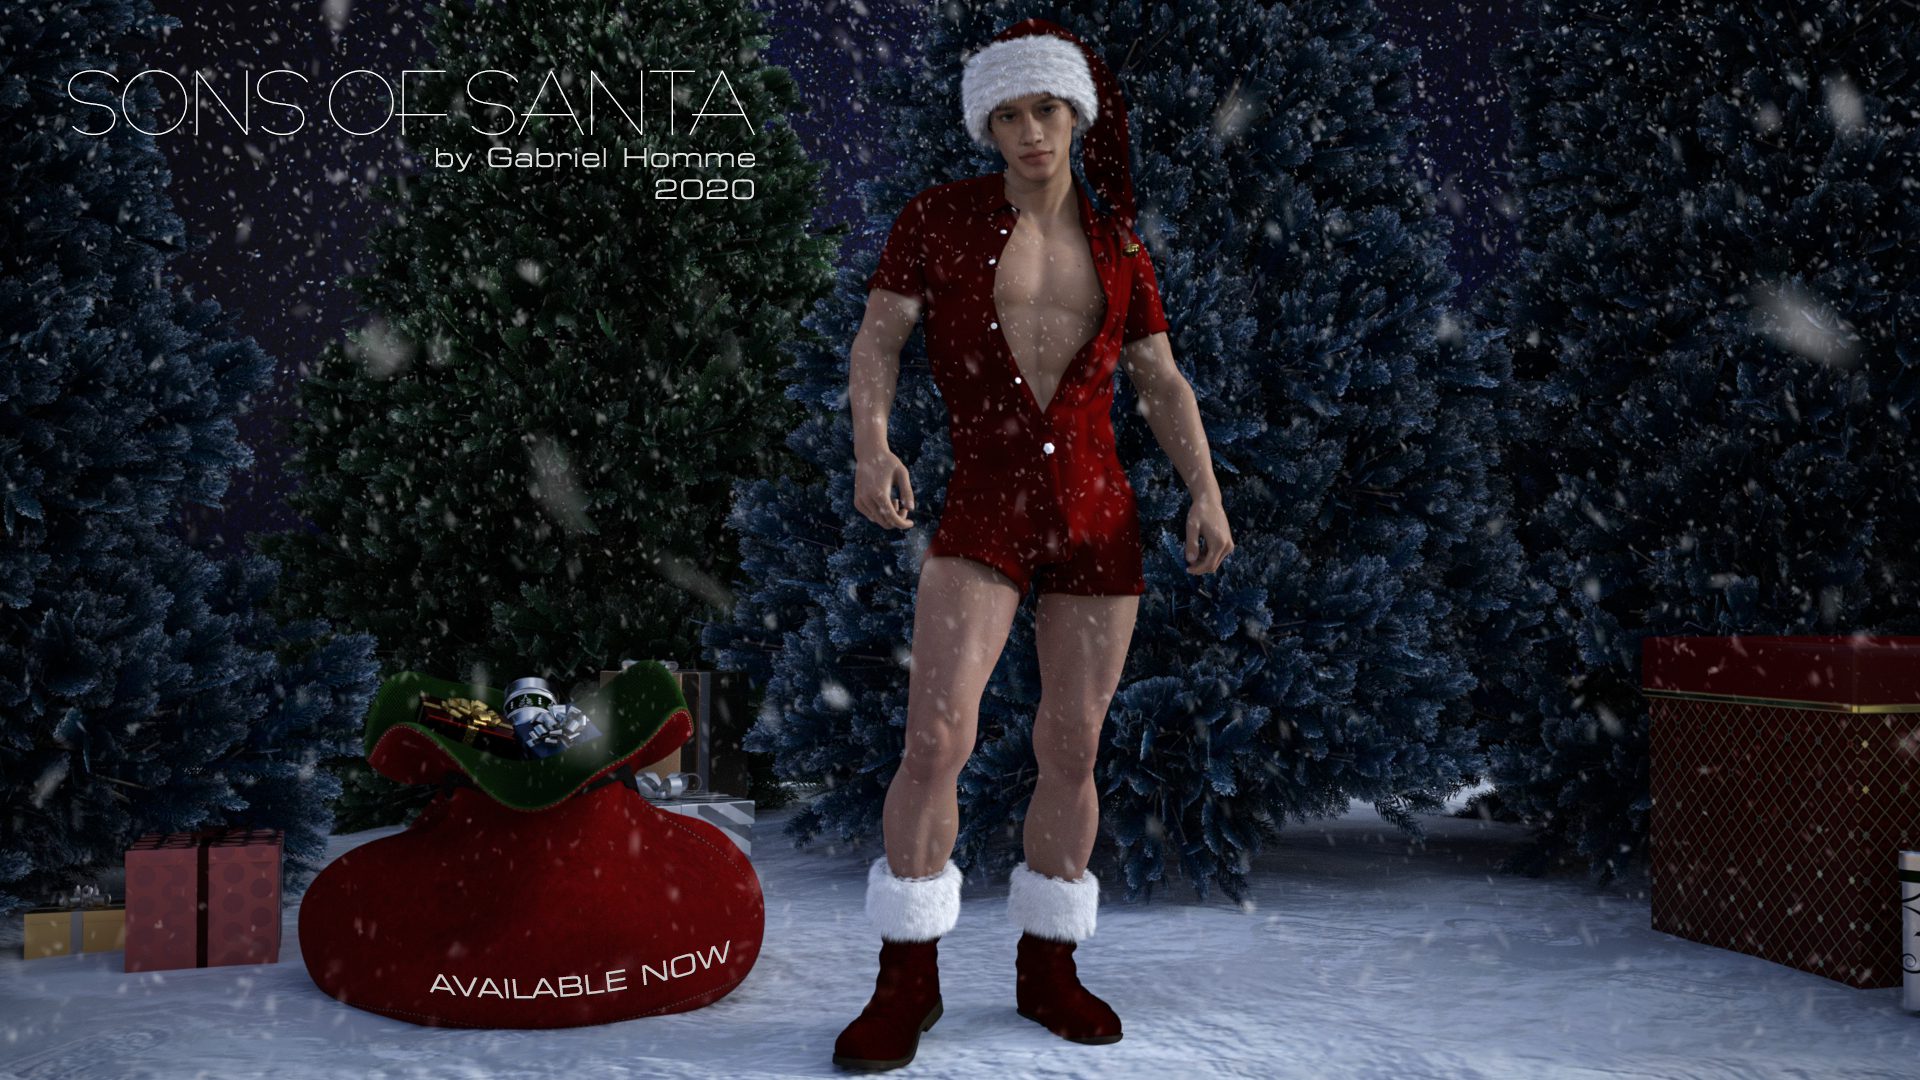 Sons of Santa 2020/Updated